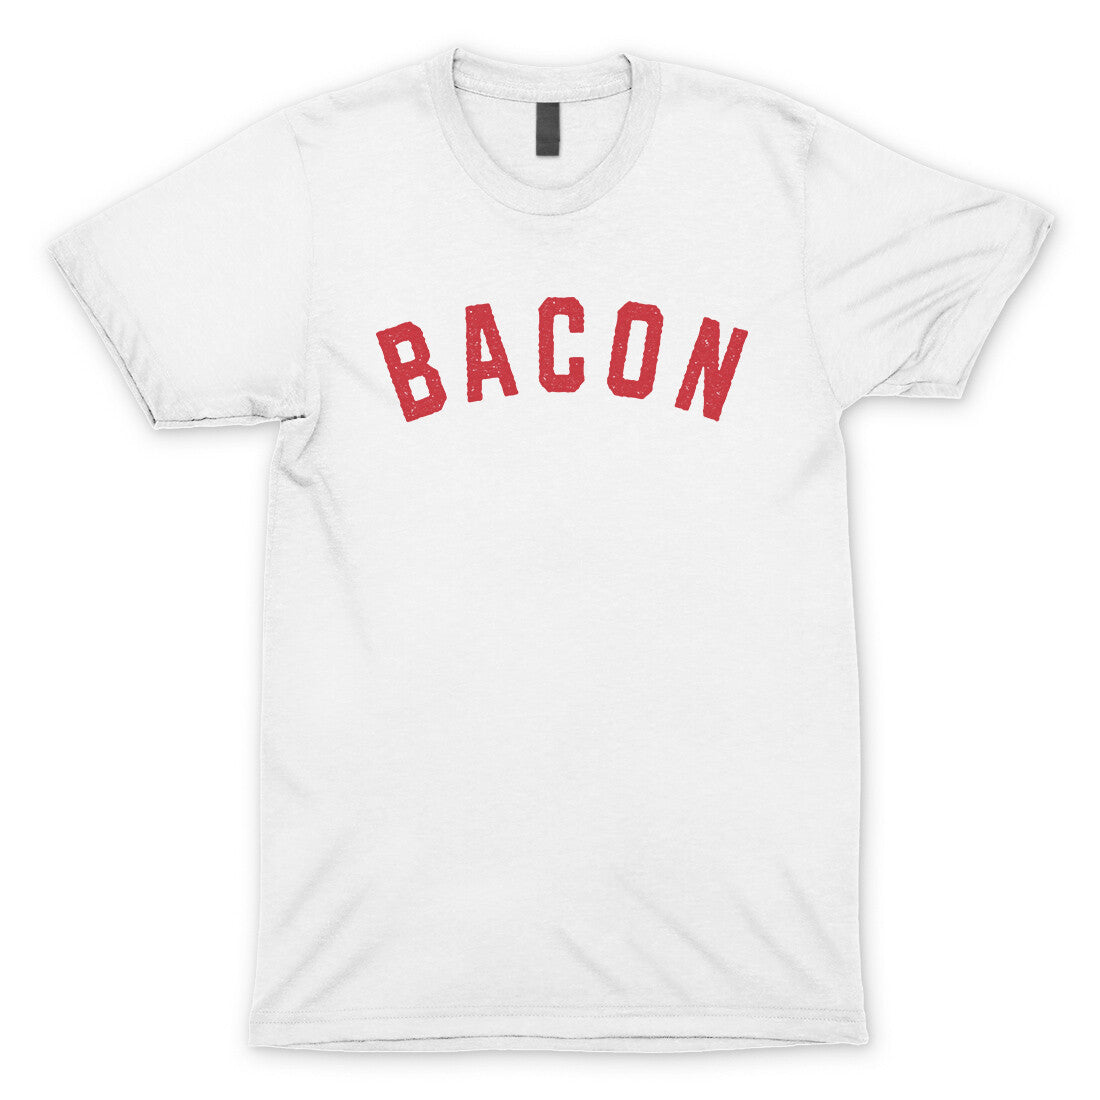 Bacon in White Color